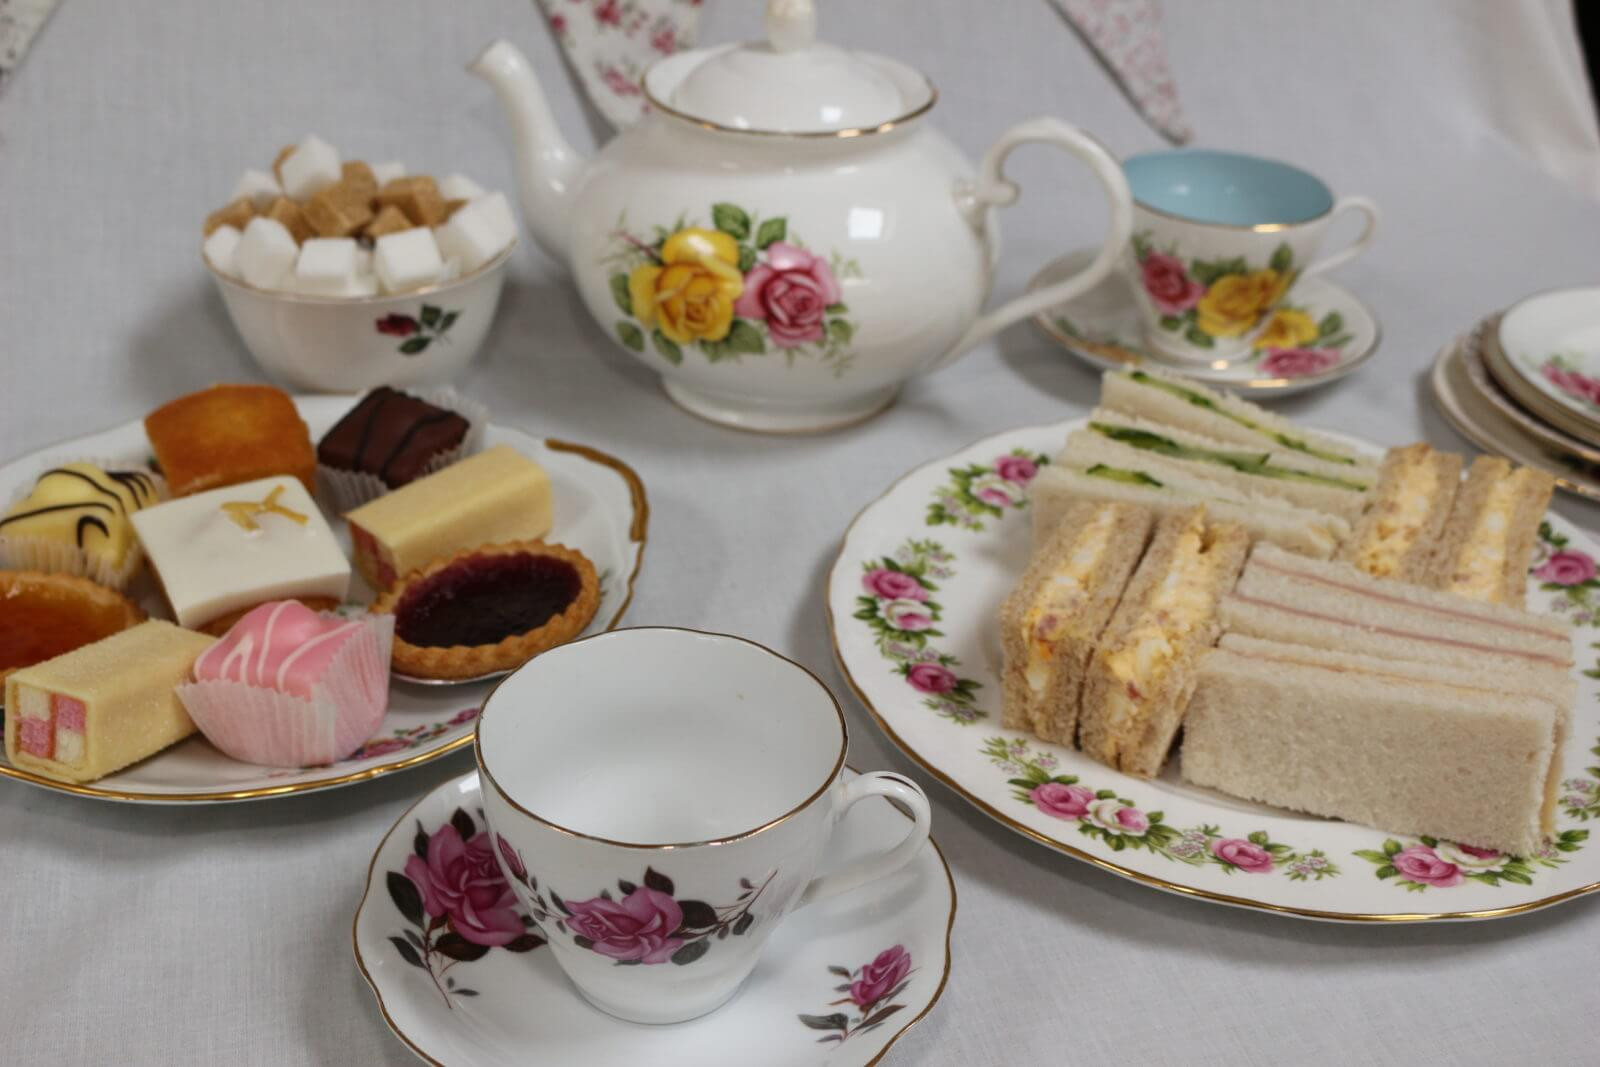 Tea Party Ideas
 10 Afternoon Tea Party Ideas to make yours extra special